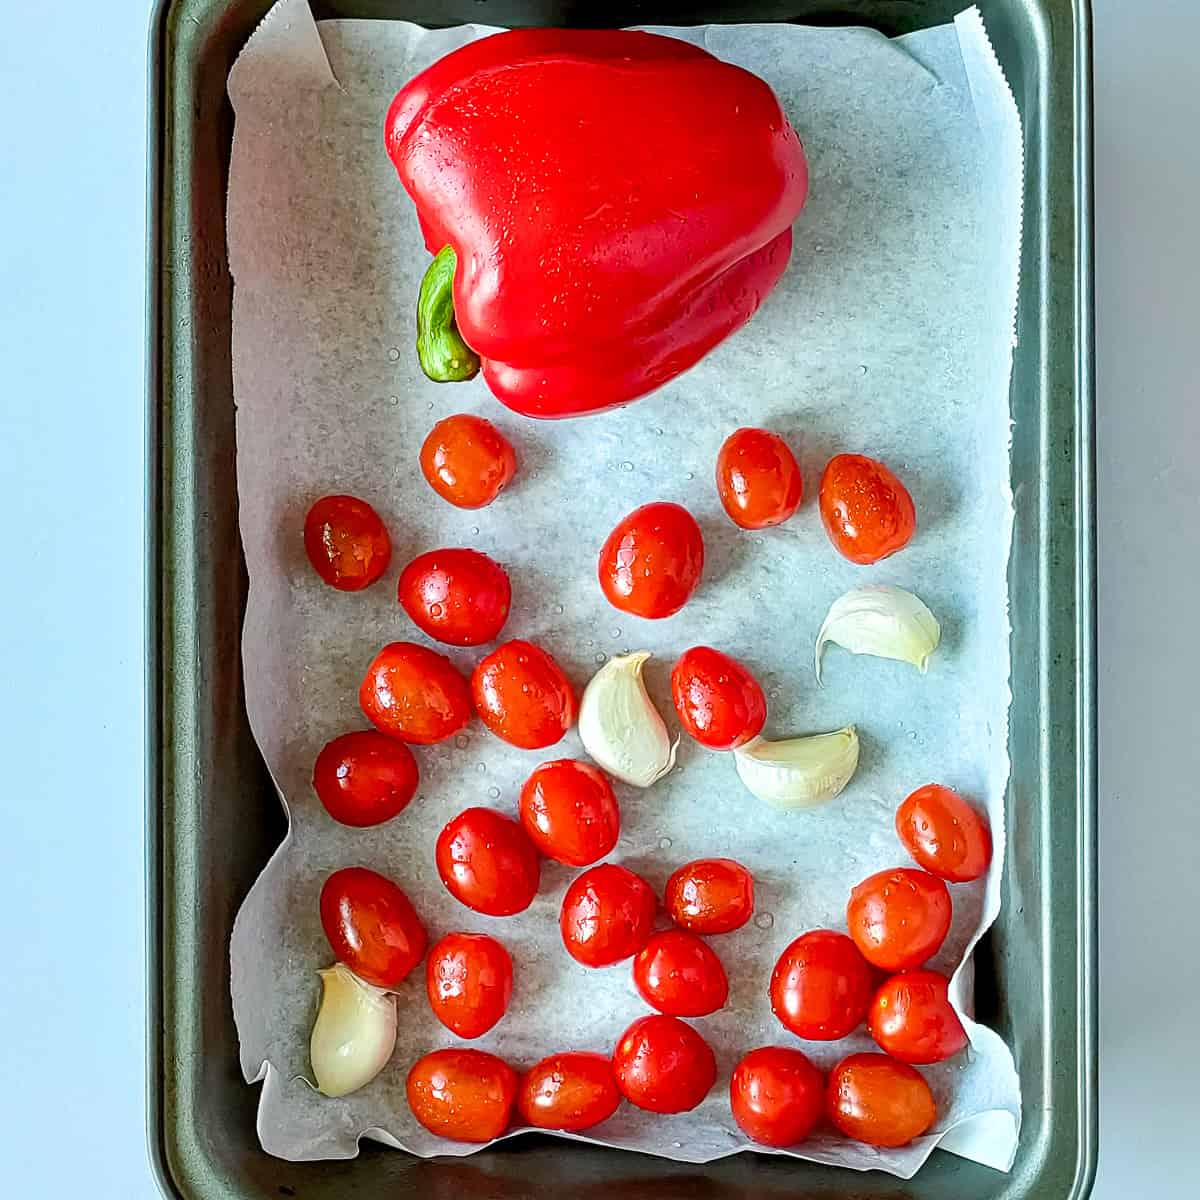 Red bell pepper, cherry tomatoes and garlic ready to be roasted in a pan.